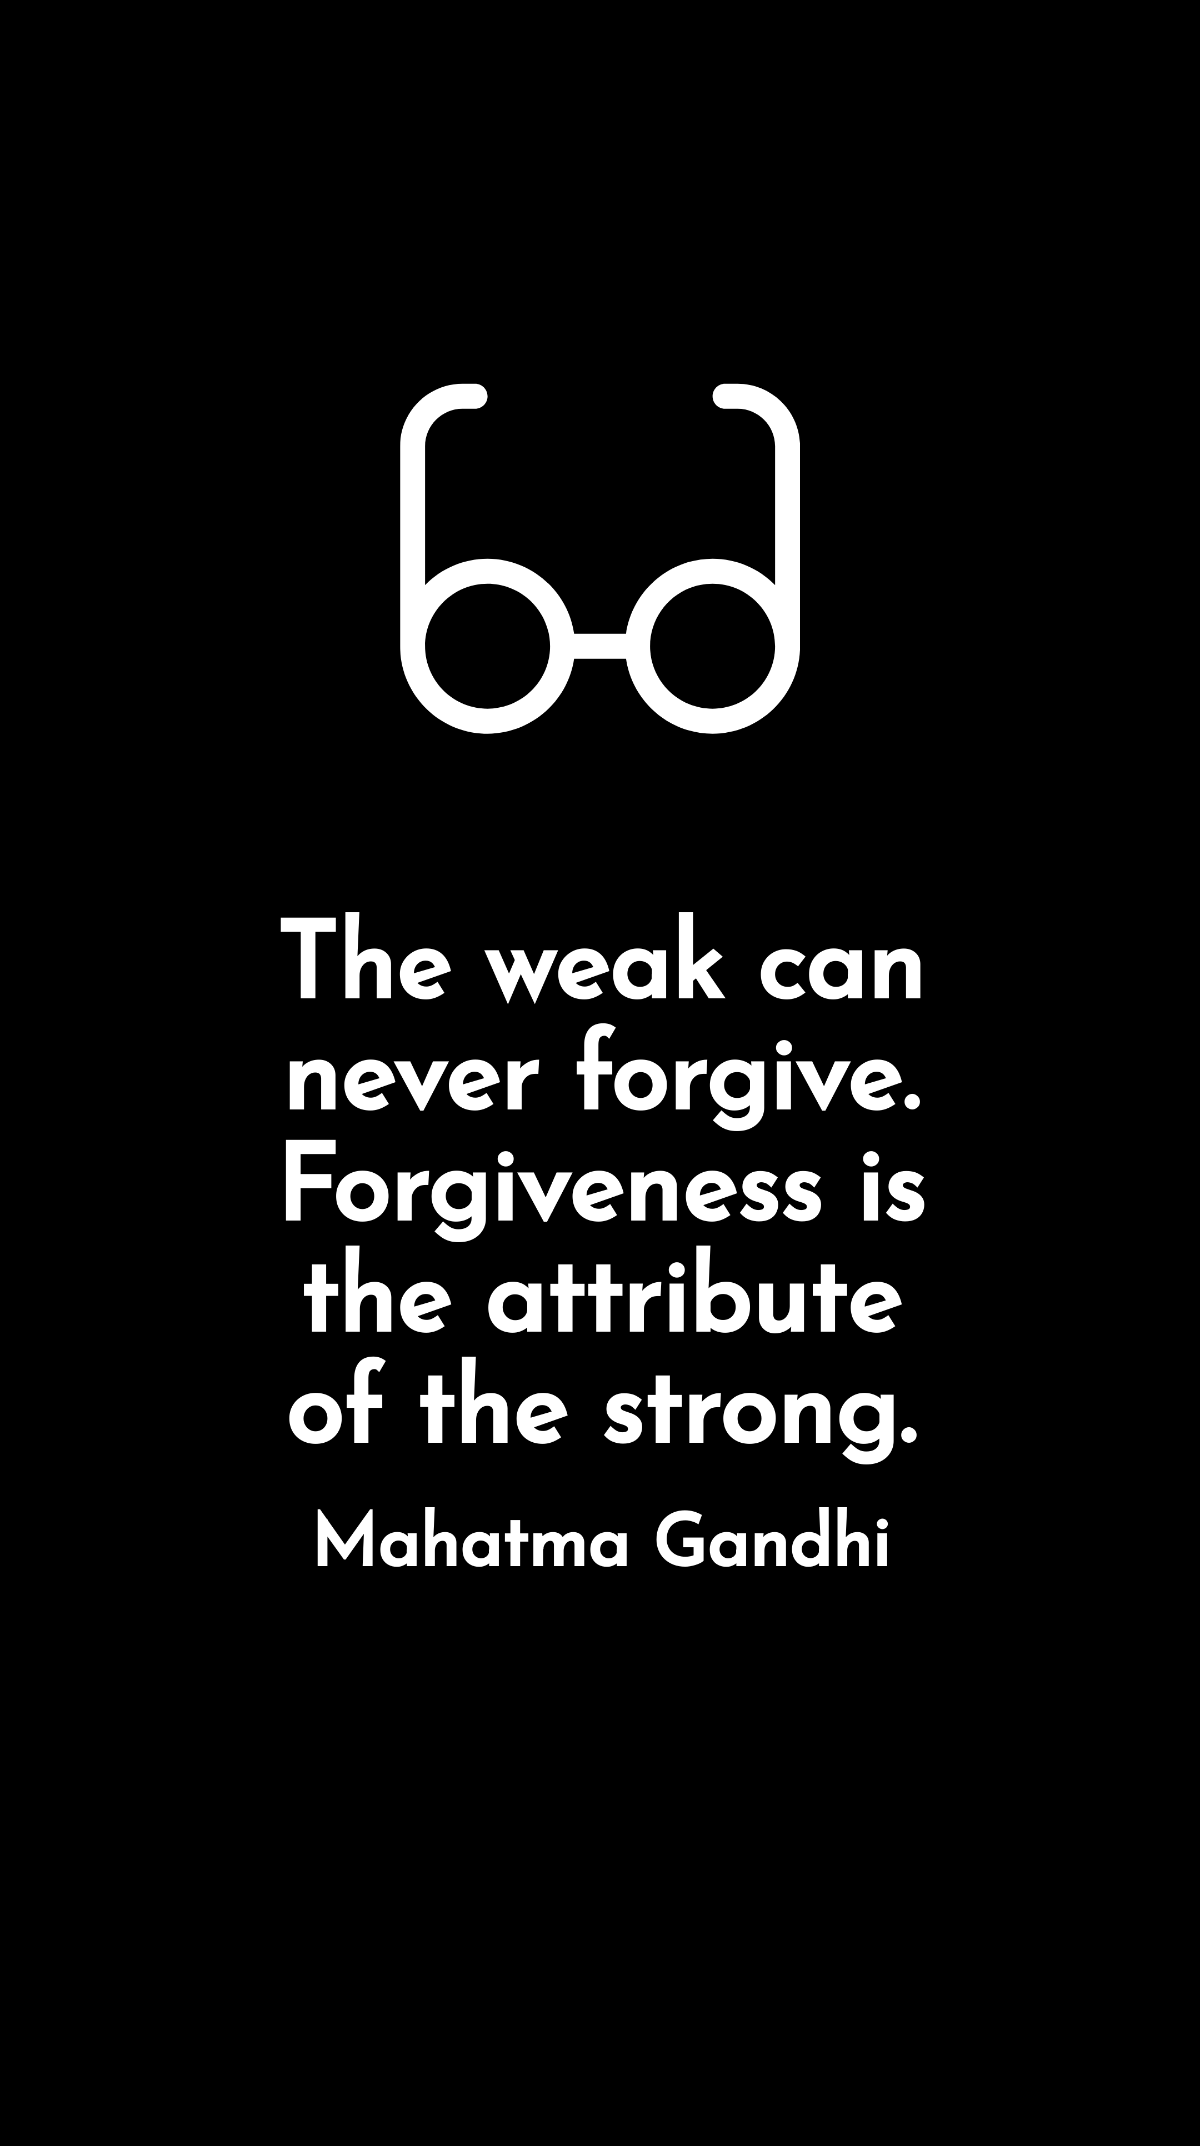 Mahatma Gandhi - The weak can never forgive. Forgiveness is the attribute of the strong. Template